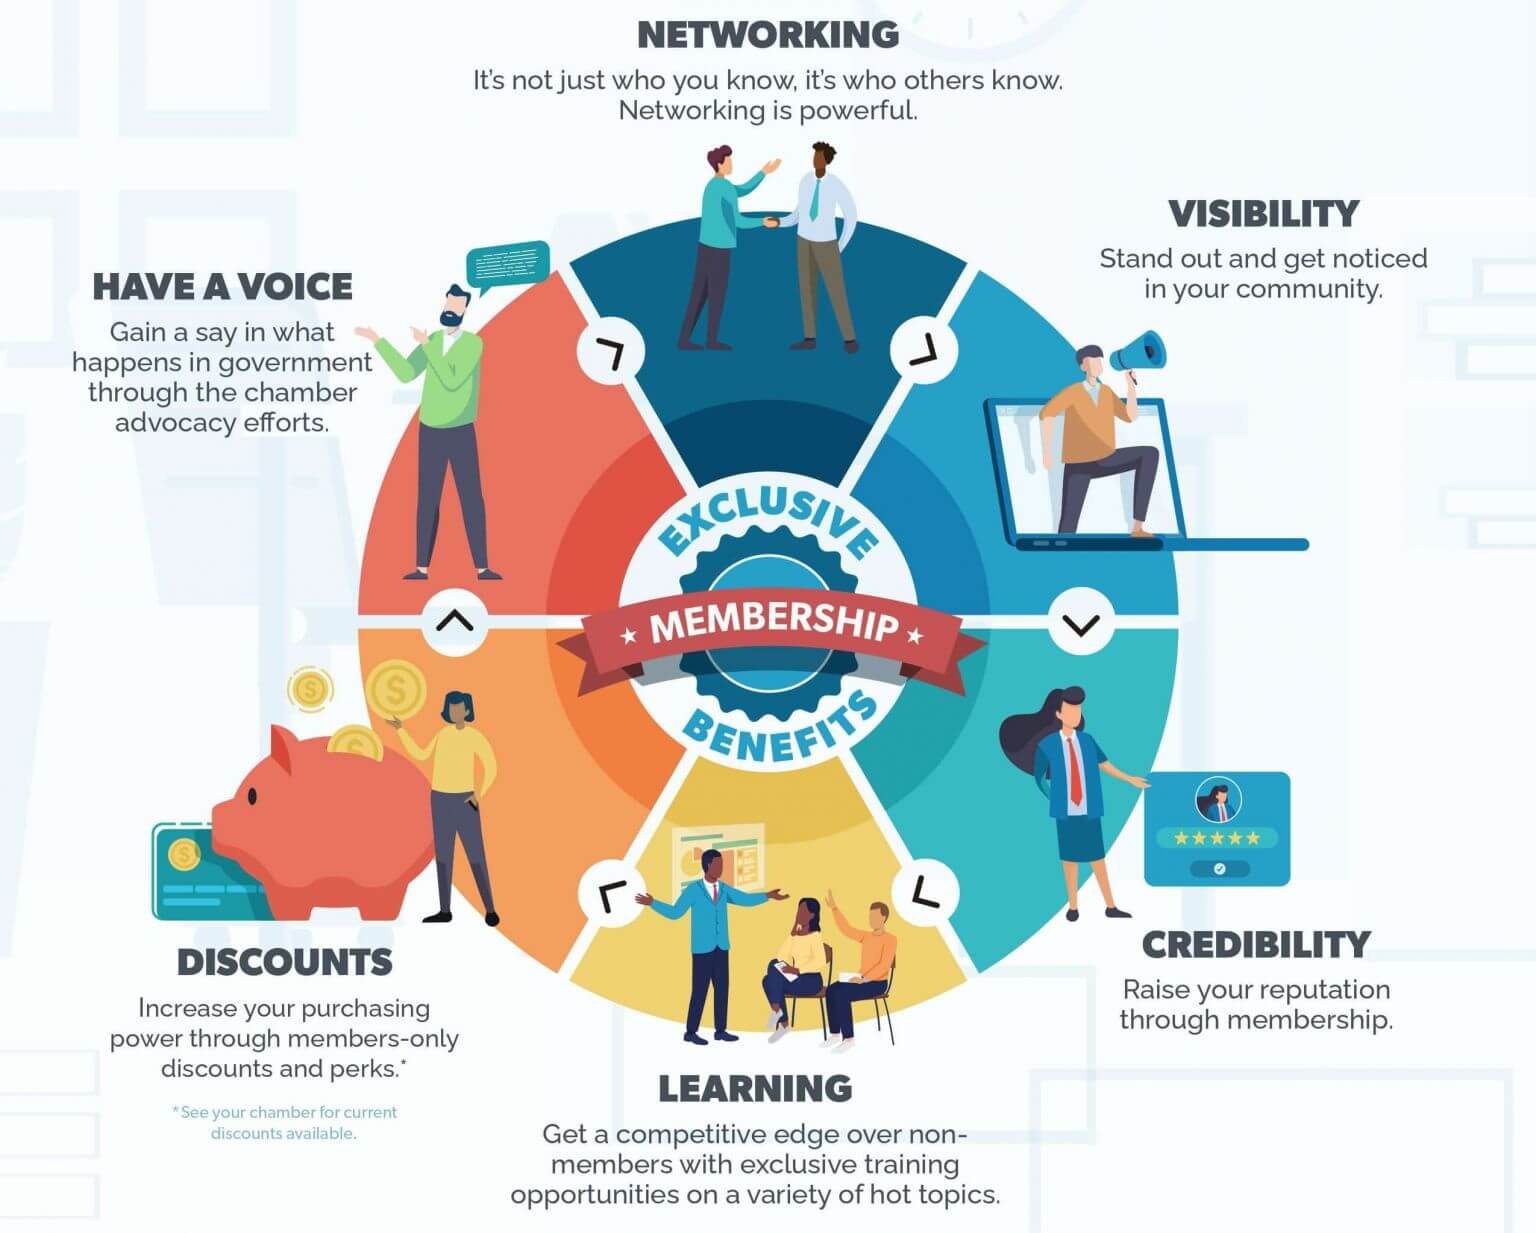 A graphic showing the benefits of joining the Mammoth Lakes Chamber of Commerce: networking, visibility, credibility, learning, discounts, and having a voice